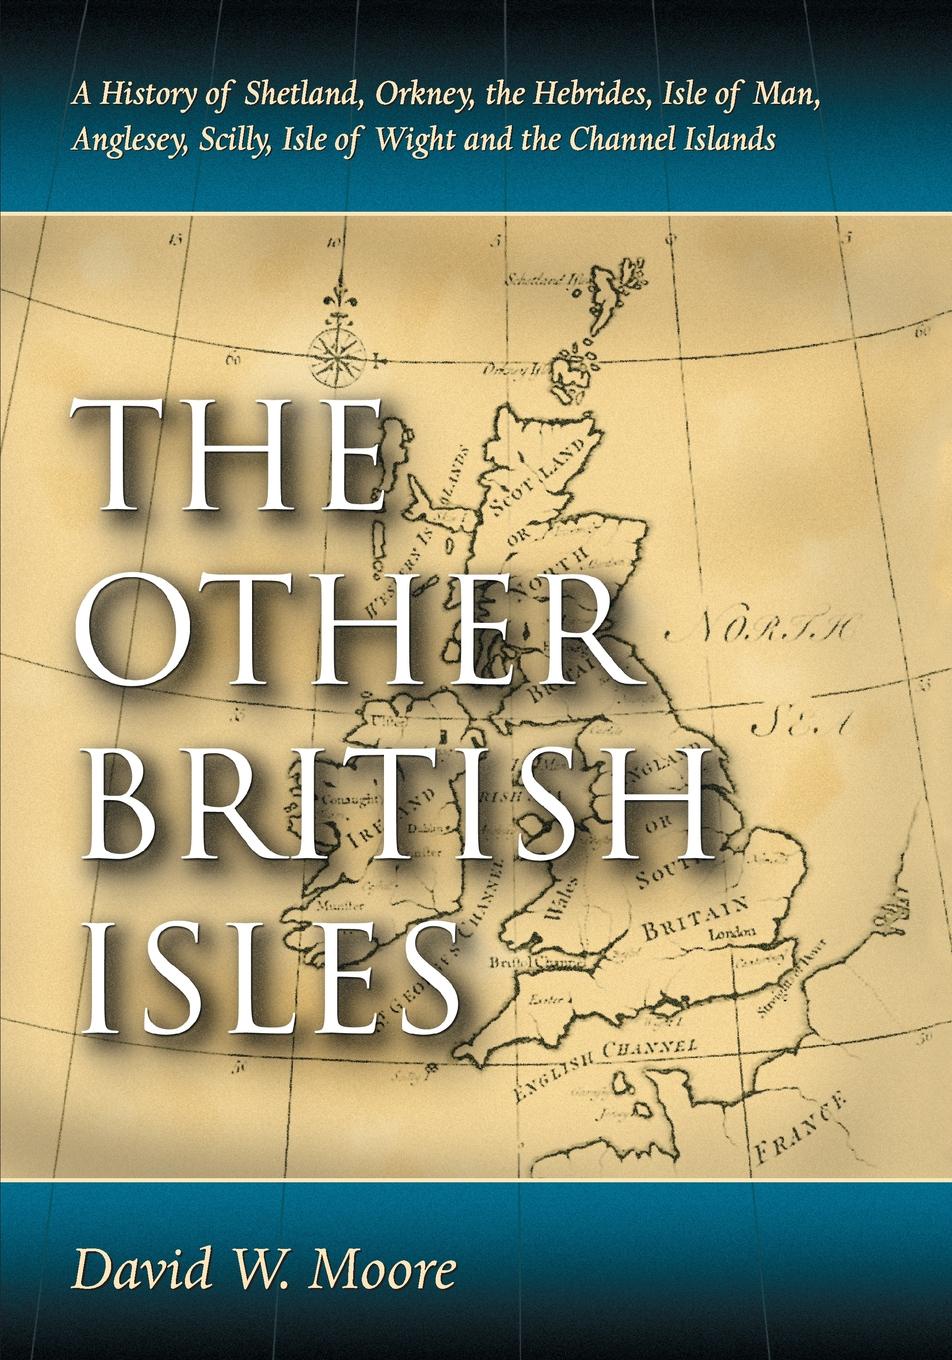 Other British Isles. A History of Shetland, Orkney, the Hebrides, Isle of Man, Anglesey, Scilly, Isle of Wight and the Channel Islands